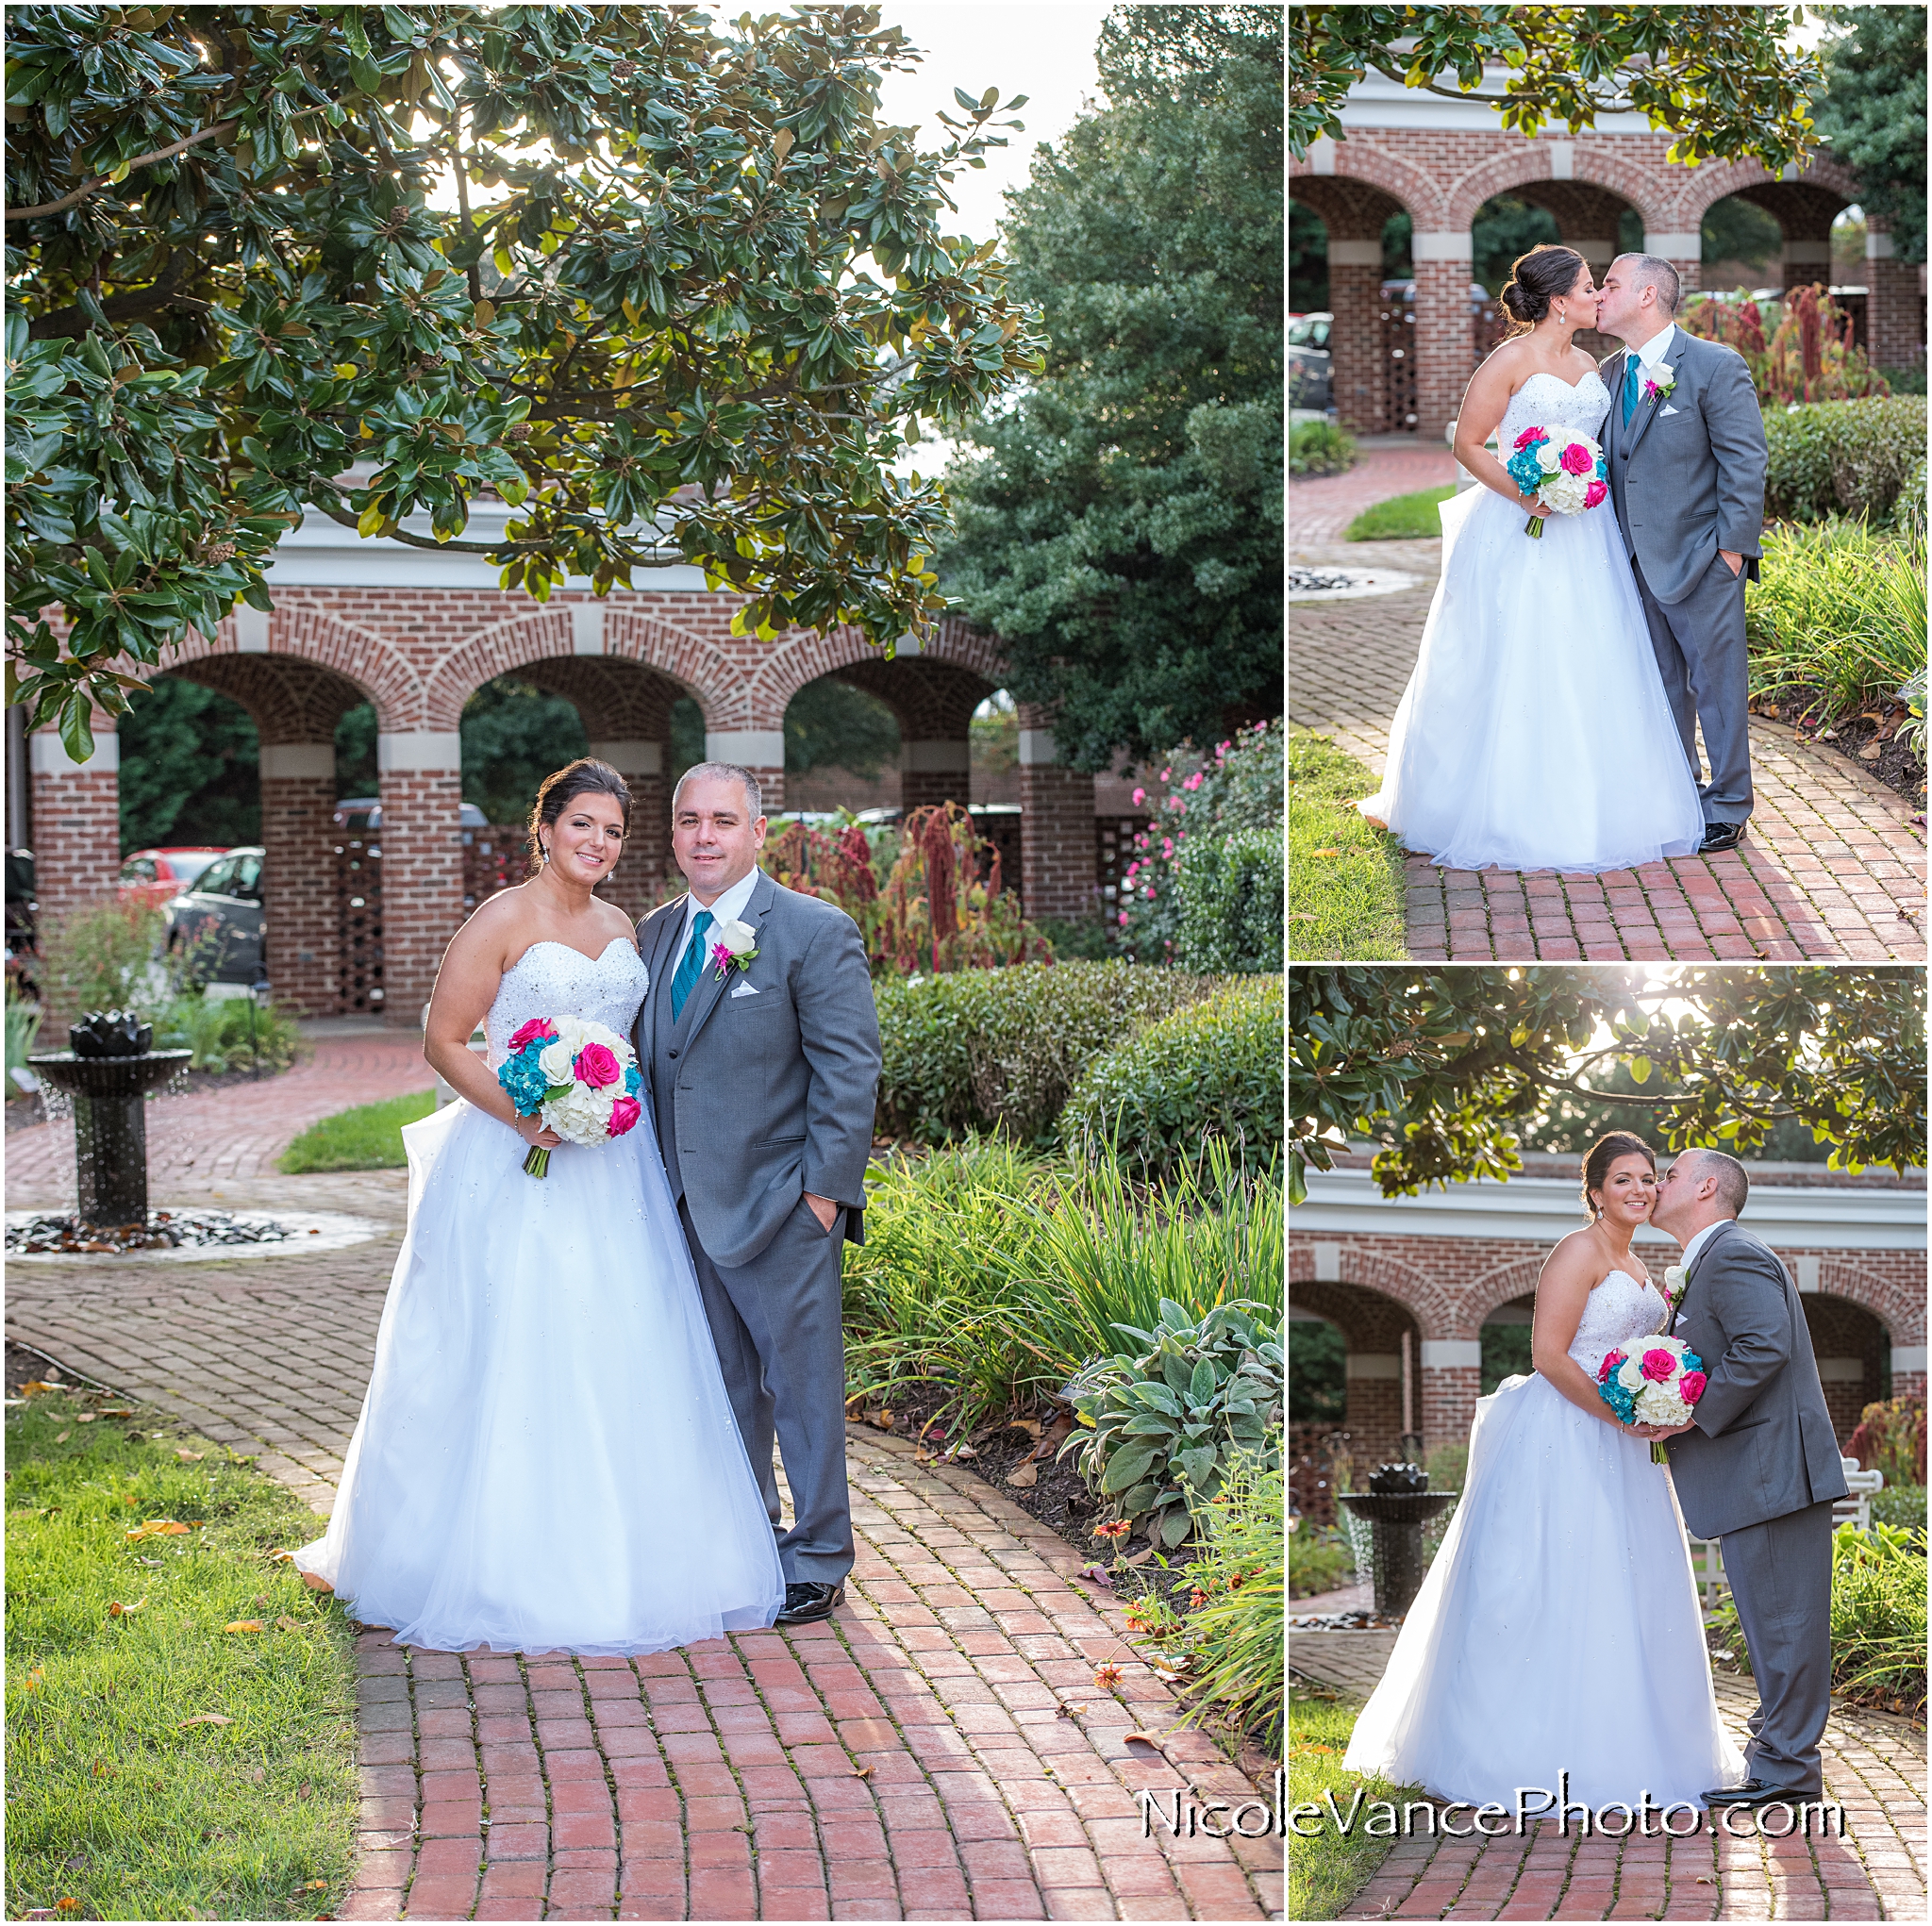 Wedding portraits at the gardens at Virginia Crossings.